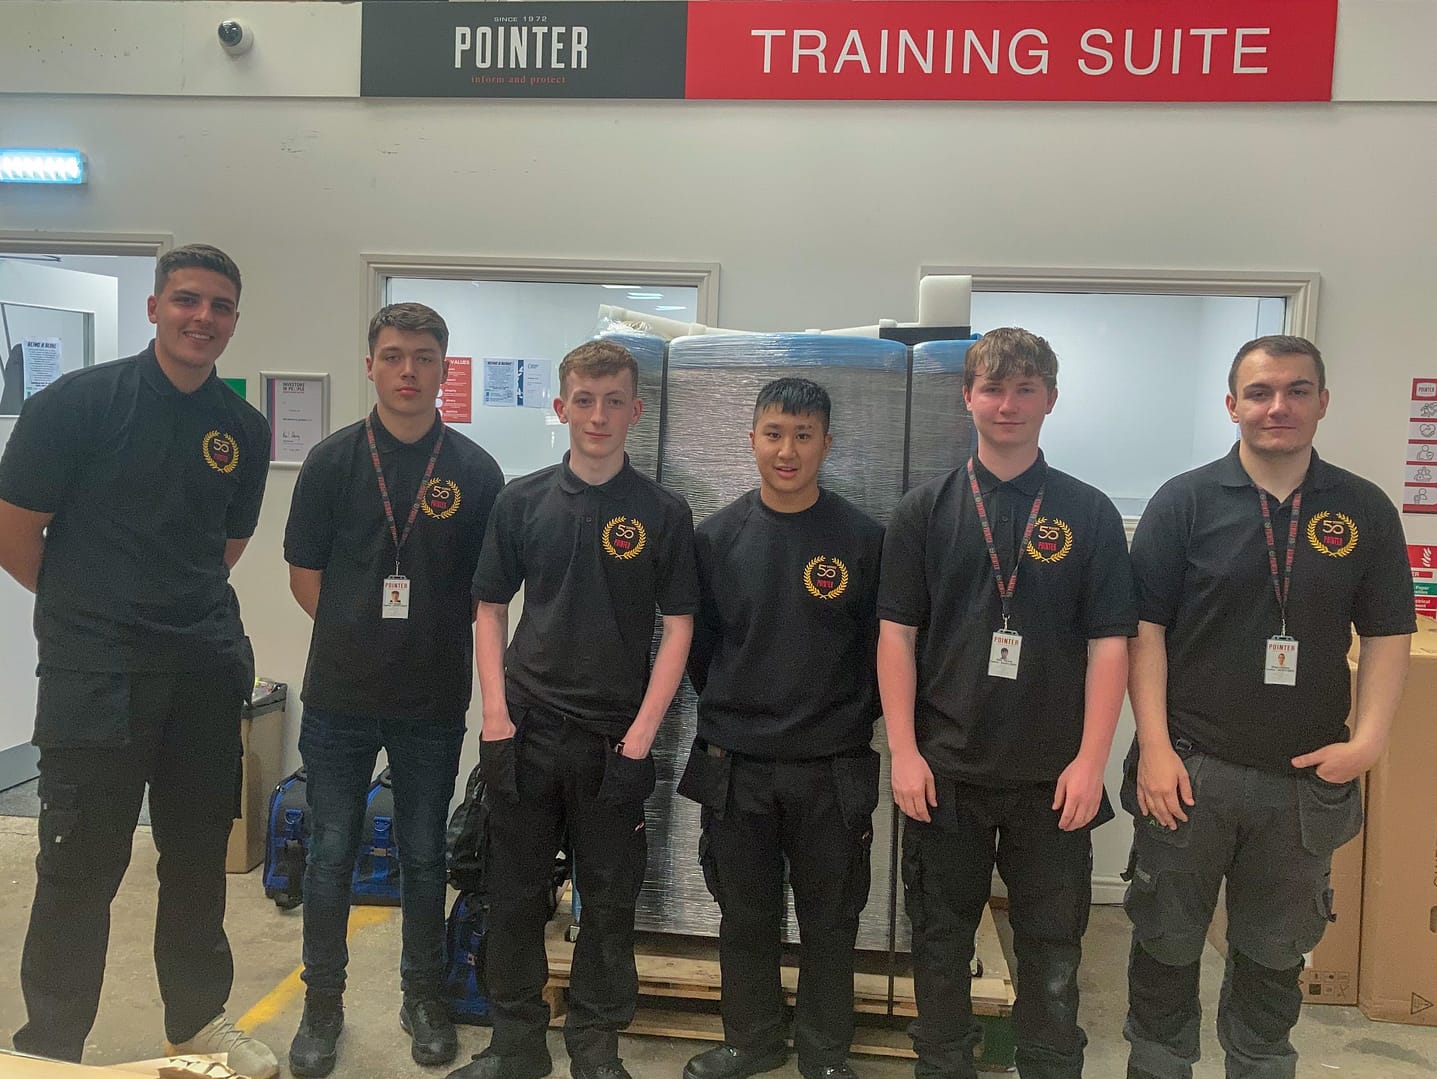 Six apprentices in a row